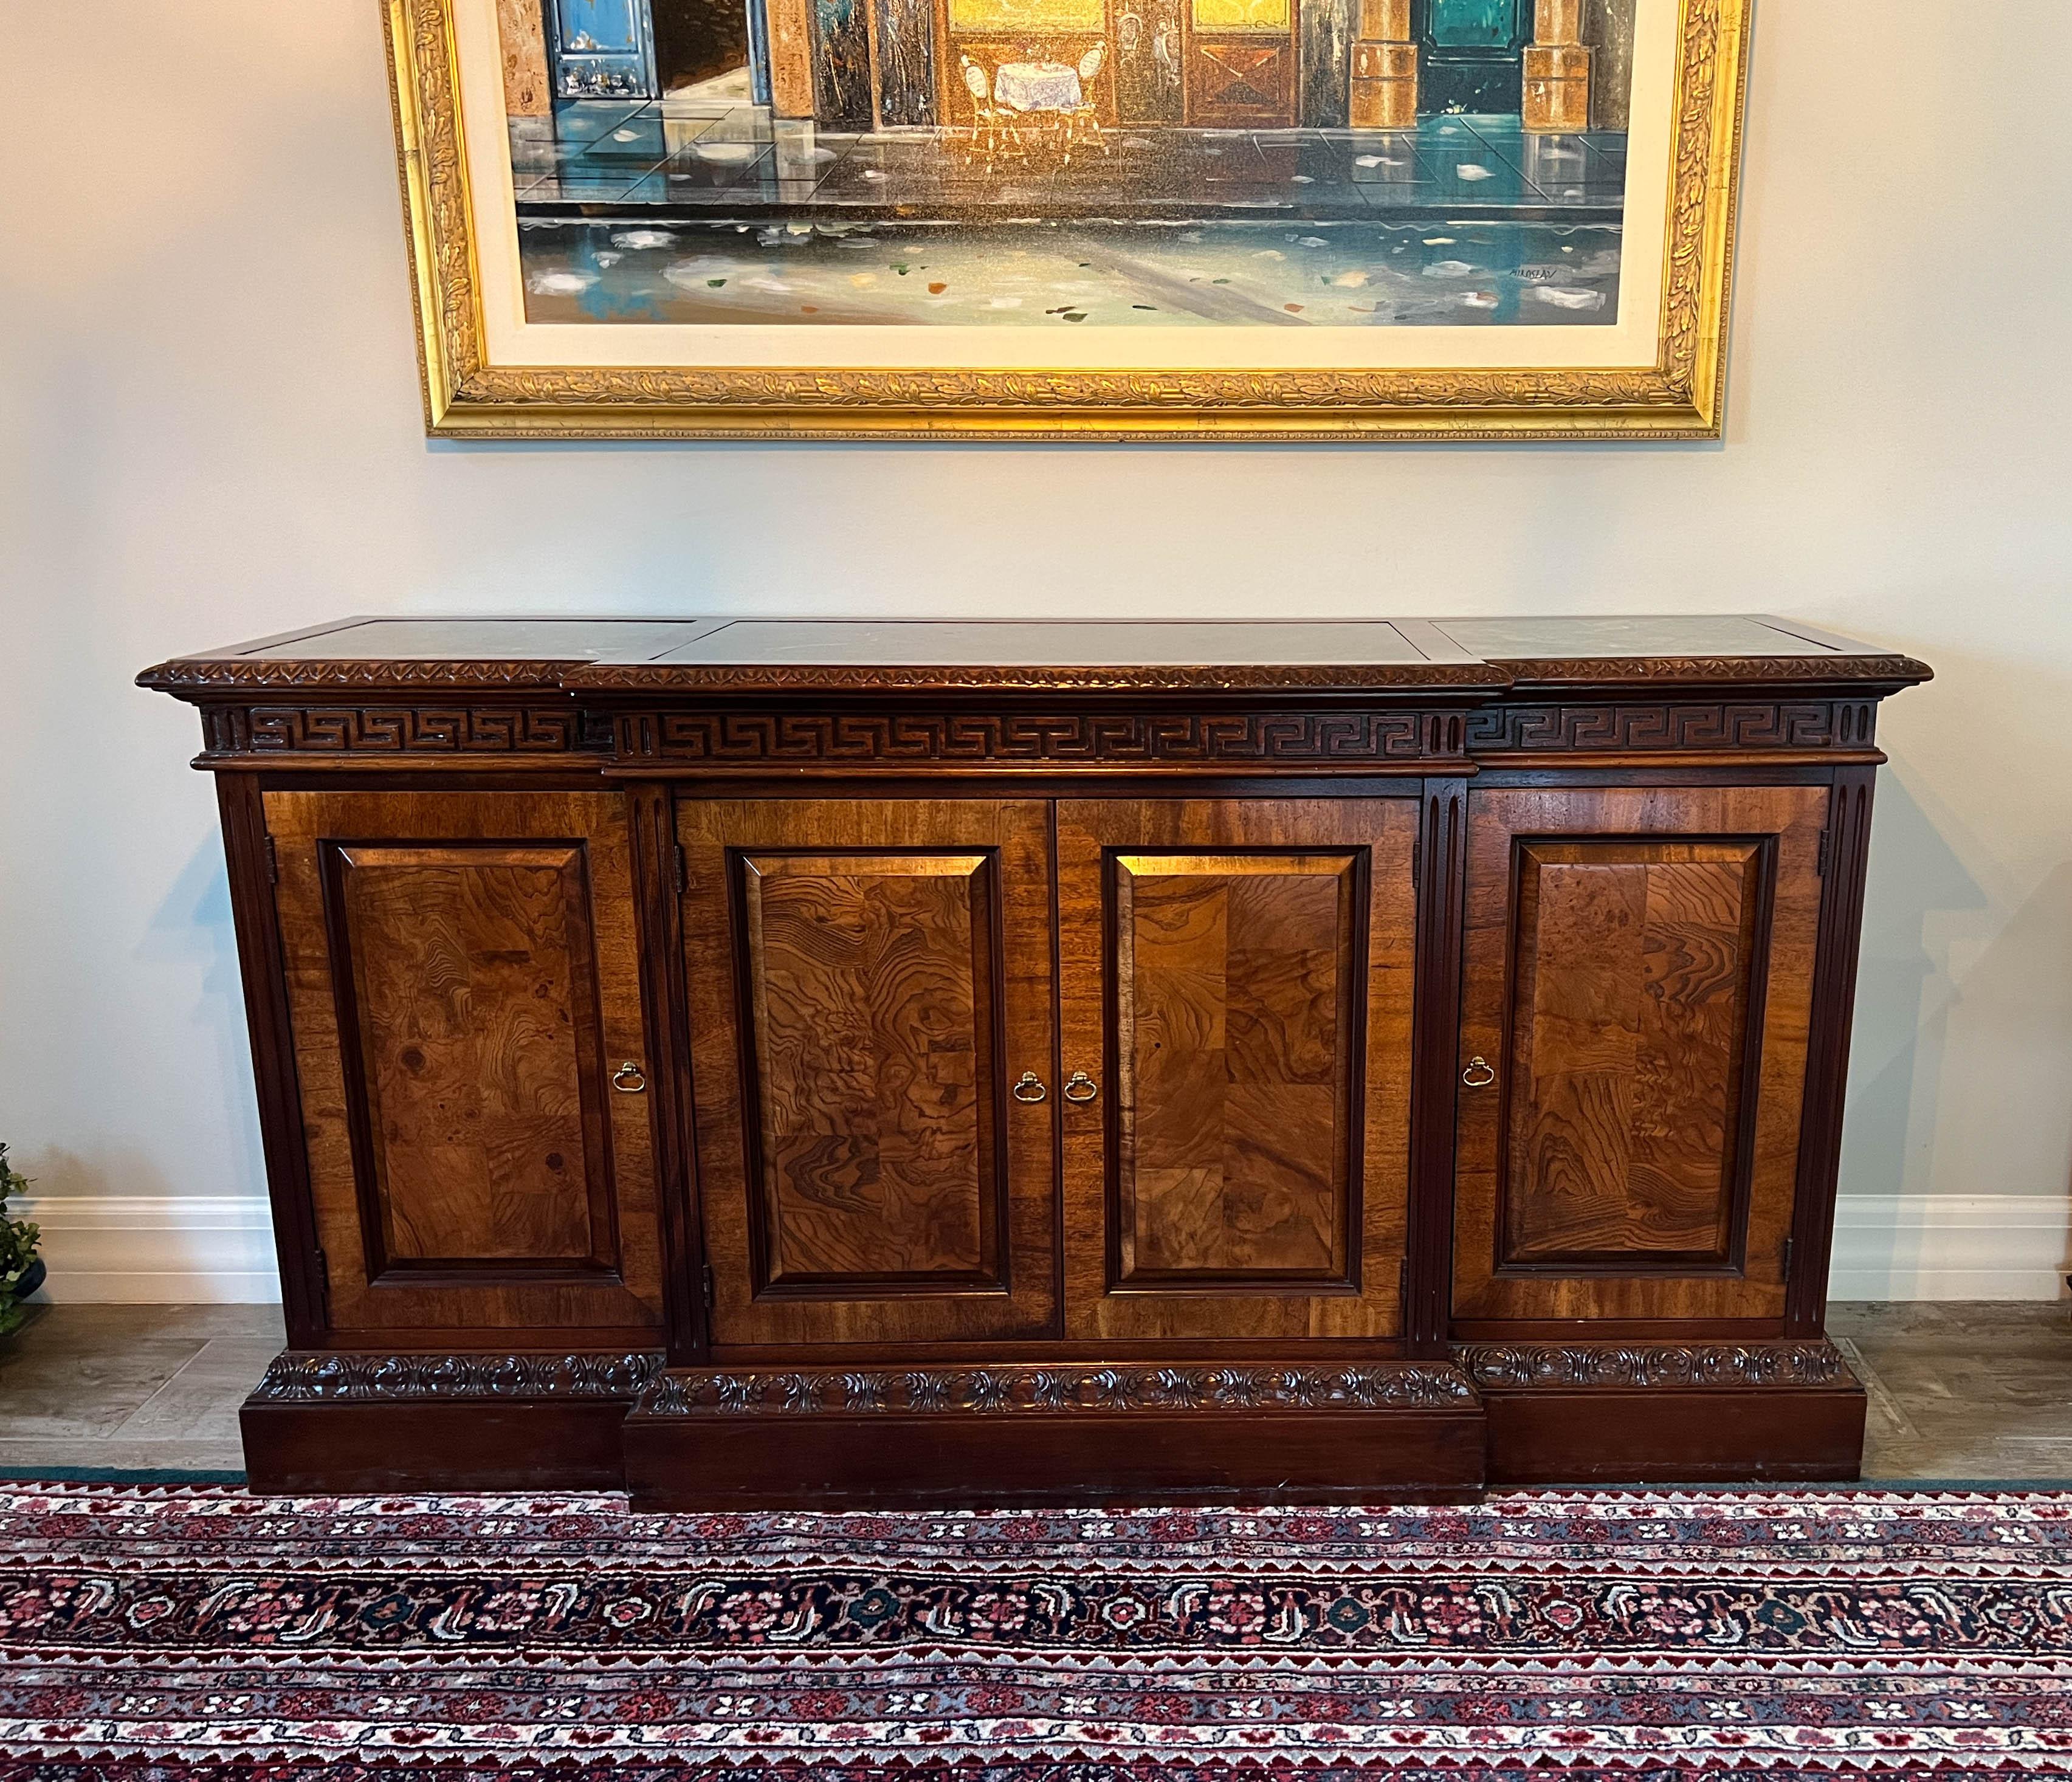 Neoclassical Revival Mahogany Buffet/Credenza With Marble Top Inset by Hekman